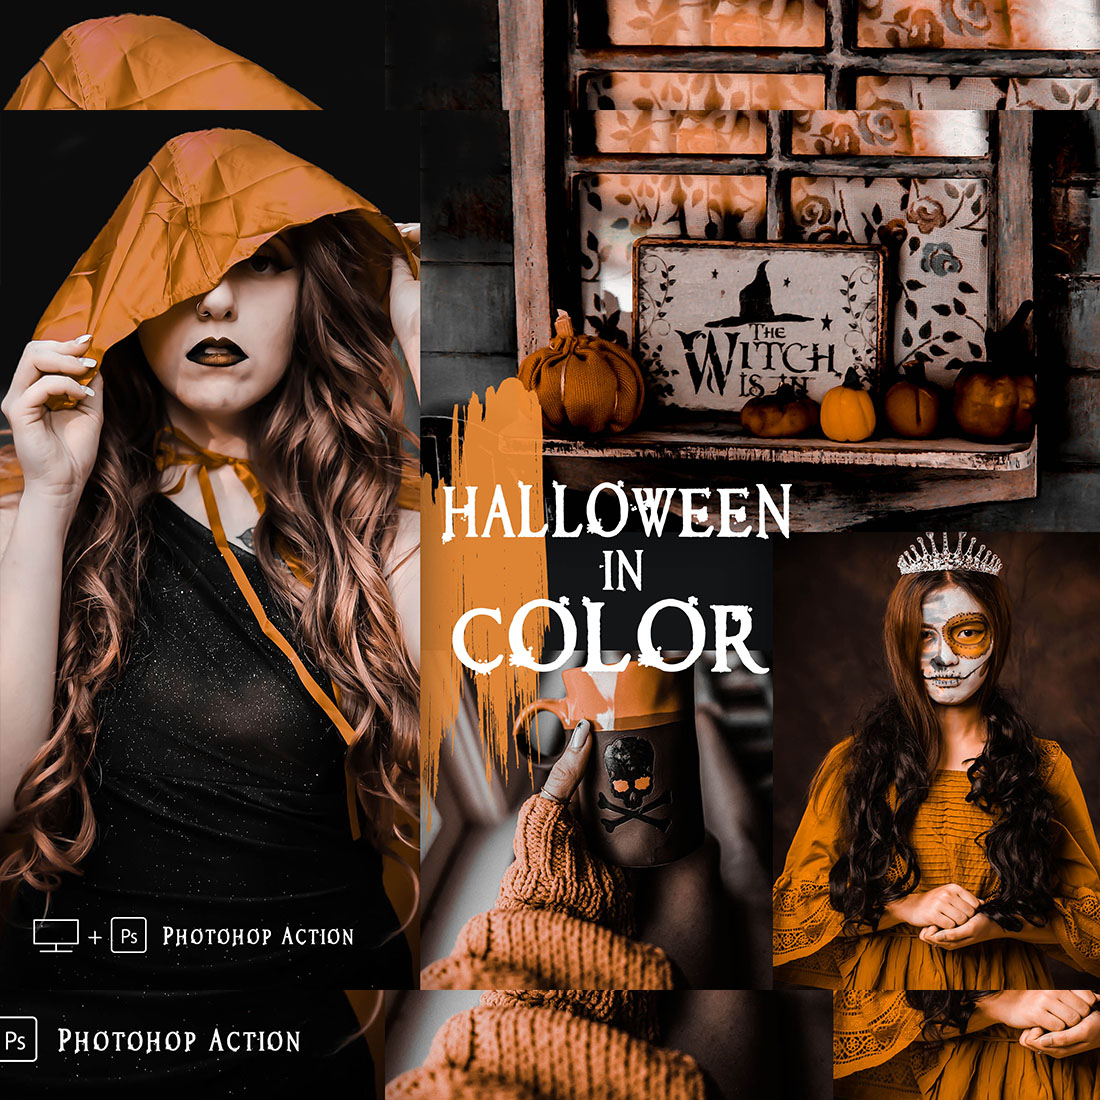 12 Photoshop Actions, Halloween In Color Ps Action, Moody ACR Preset, Fall Filter, Lifestyle Theme For Instagram, Autumn Presets, Gray portrait cover image.